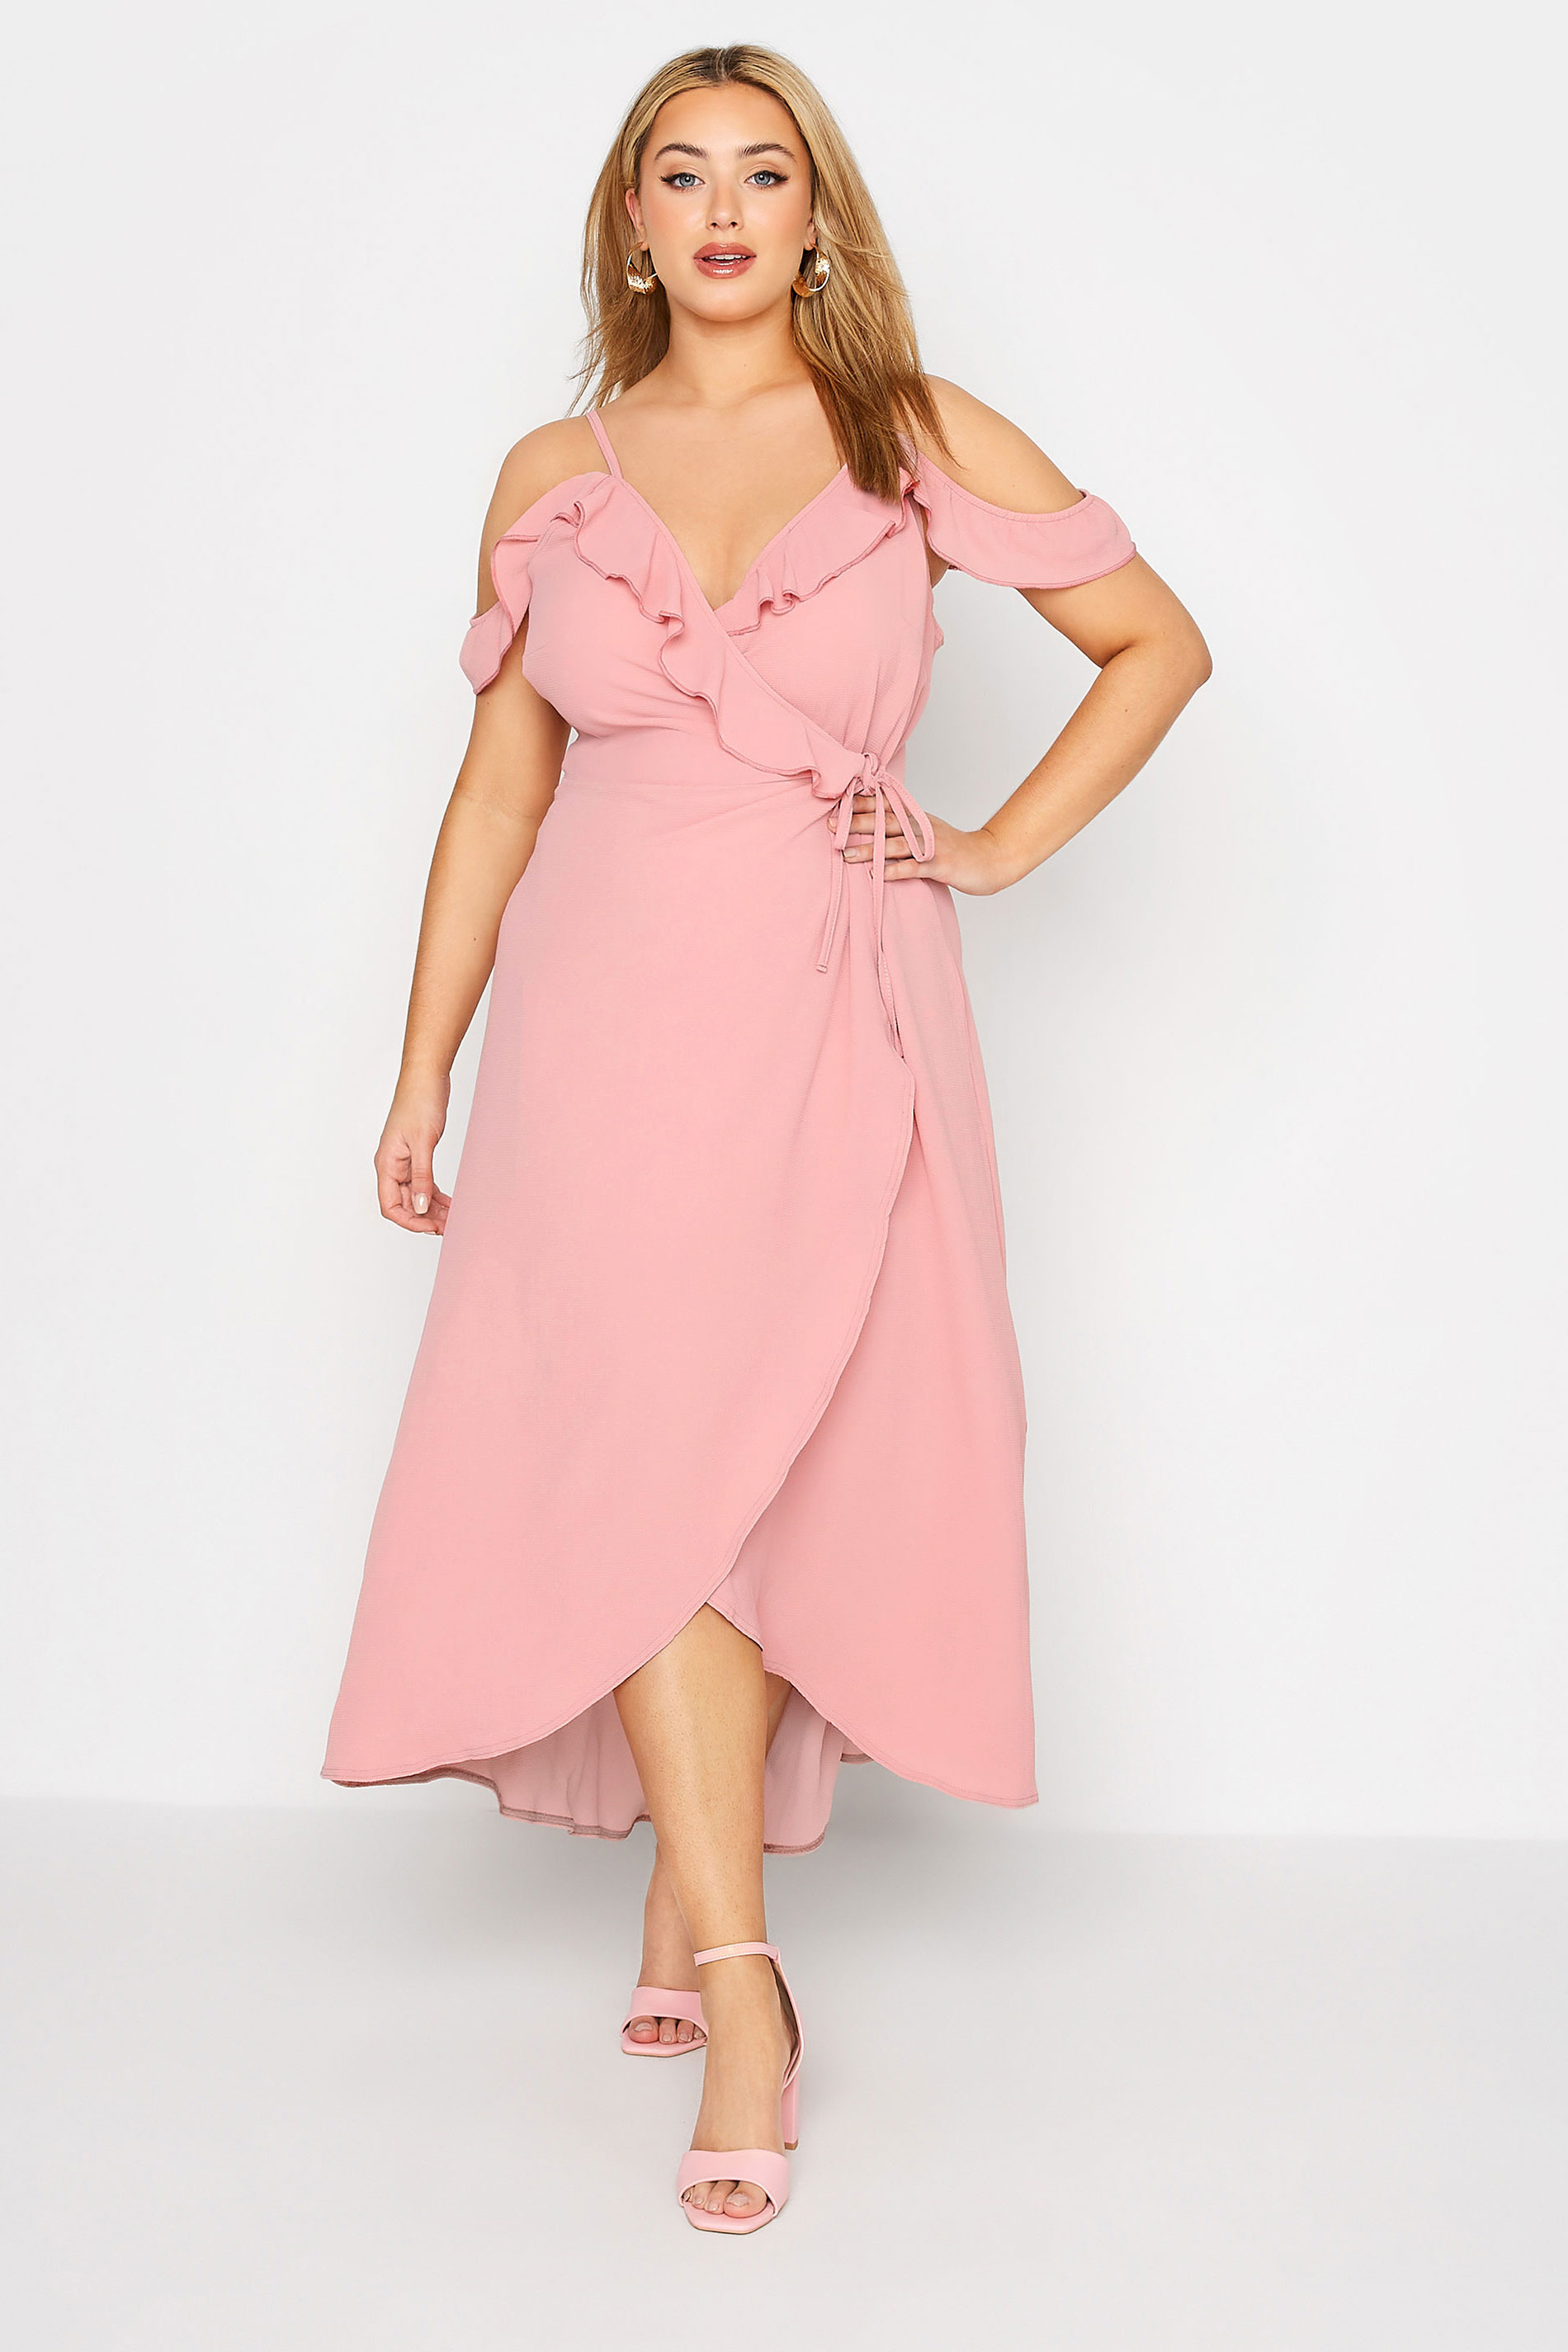 Robes Grande Taille Grande taille  Robes Longues | YOURS LONDON - Robe Maxi Rose Pastel Bardot Volanté - XN53899